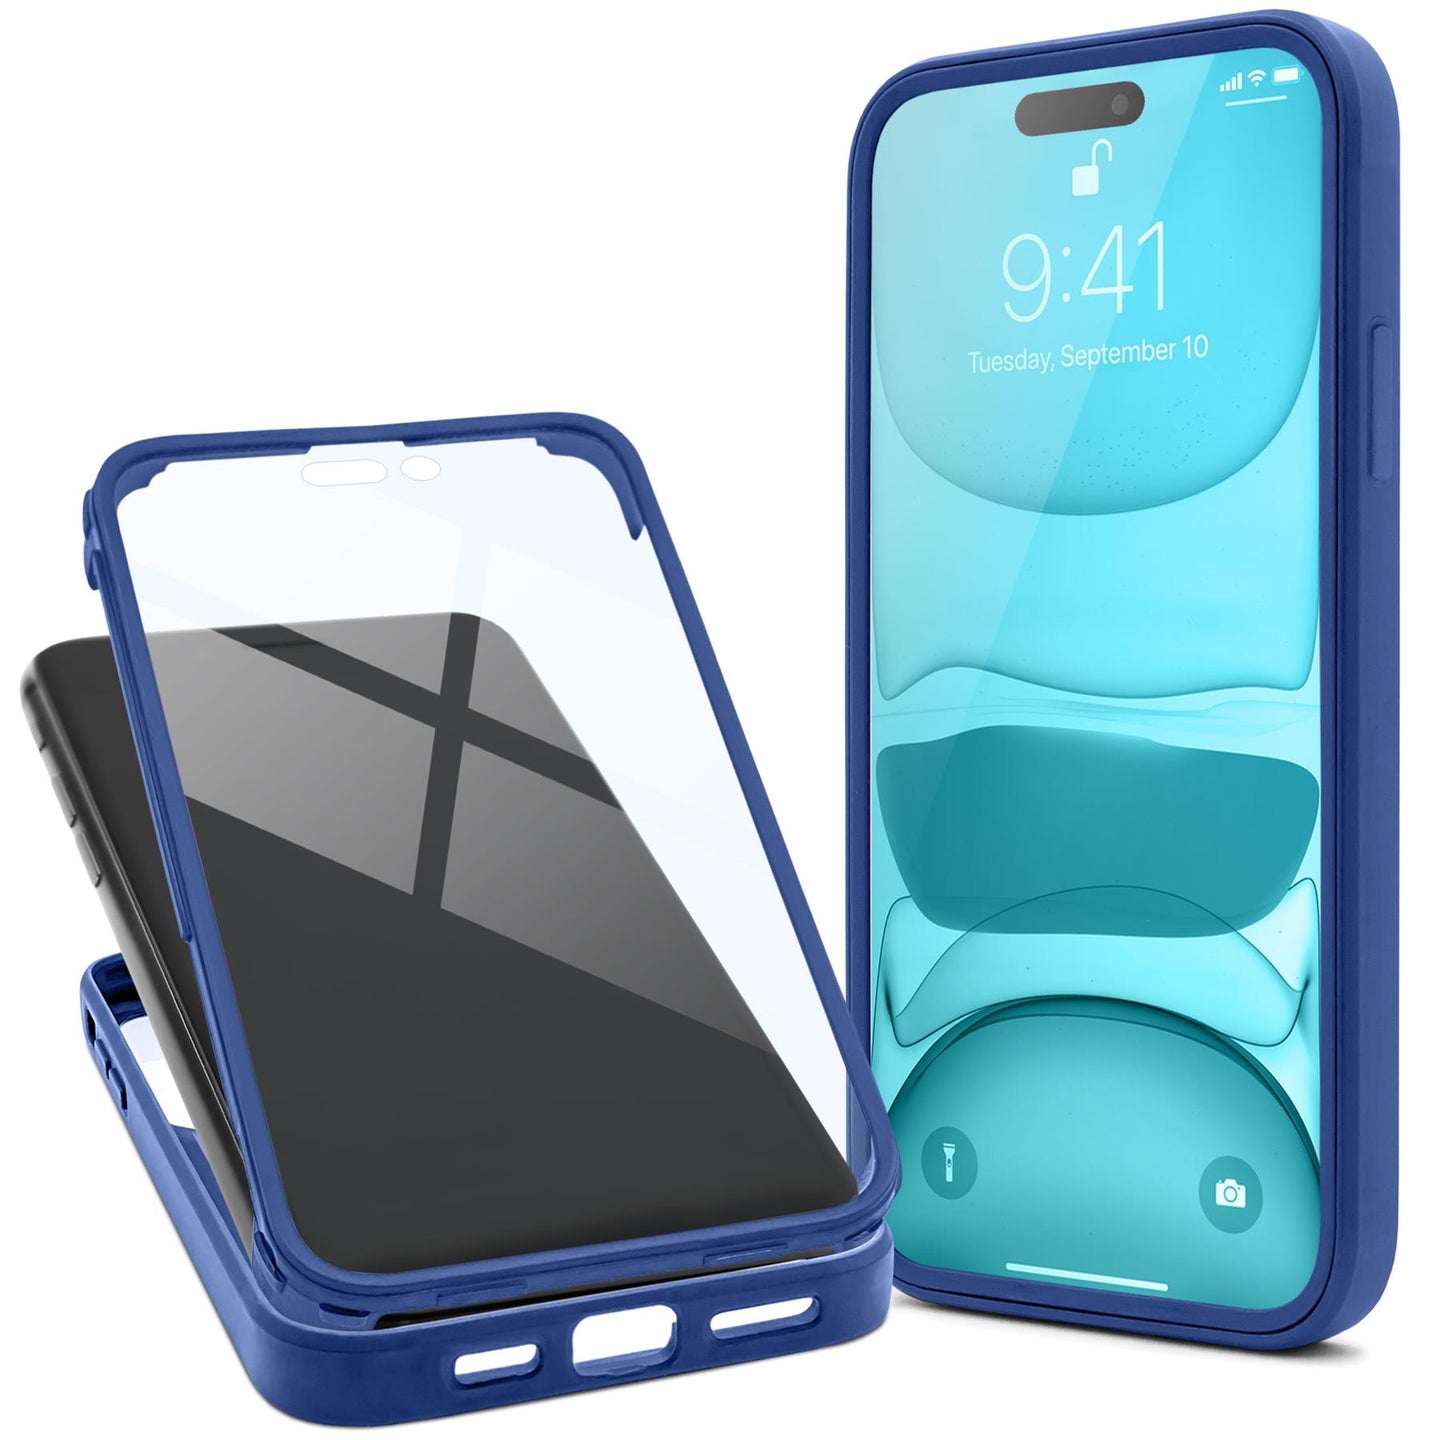 Moozy 360 Case for iPhone 14 Pro Max - Blue Rim Transparent Case, Full Body Double-sided Protection, Cover with Built-in Screen Protector